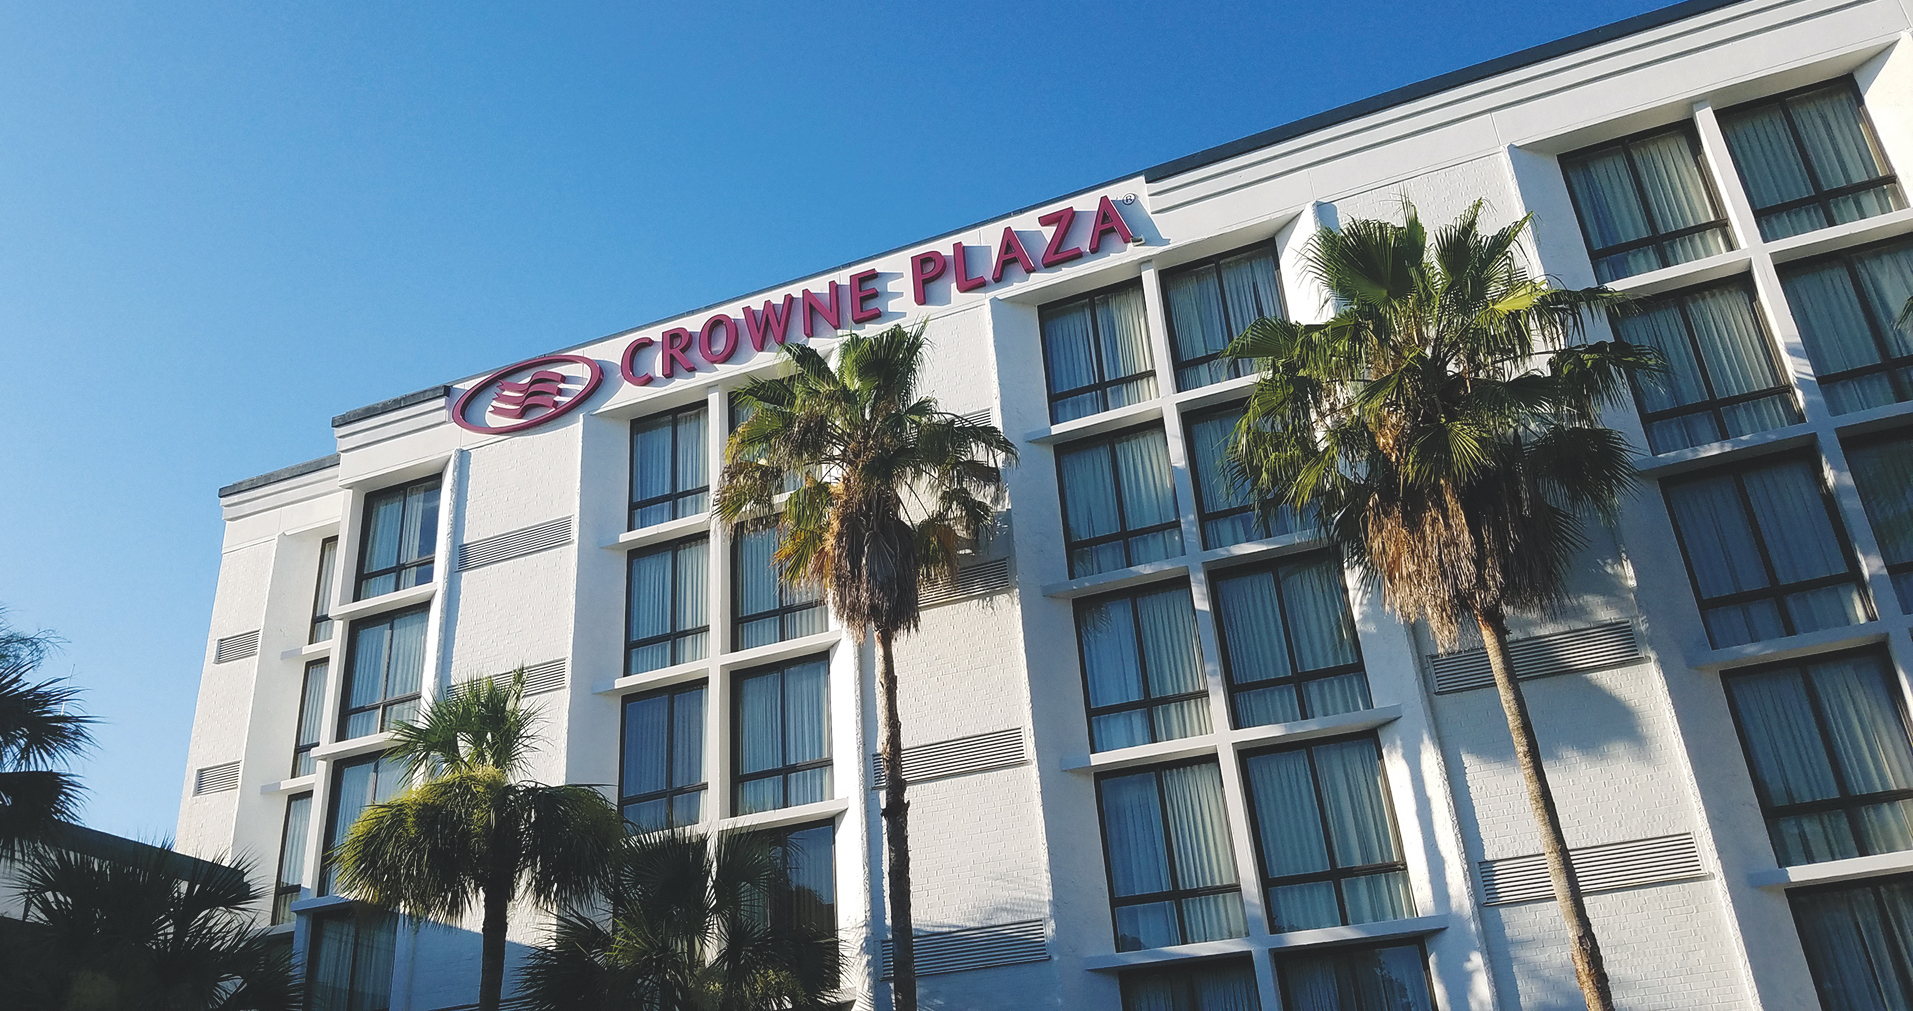 The 1980s-era Crowne Plaza Jacksonville Airport in North Jacksonville will undergo a $10 million renovation with completion in 2020.